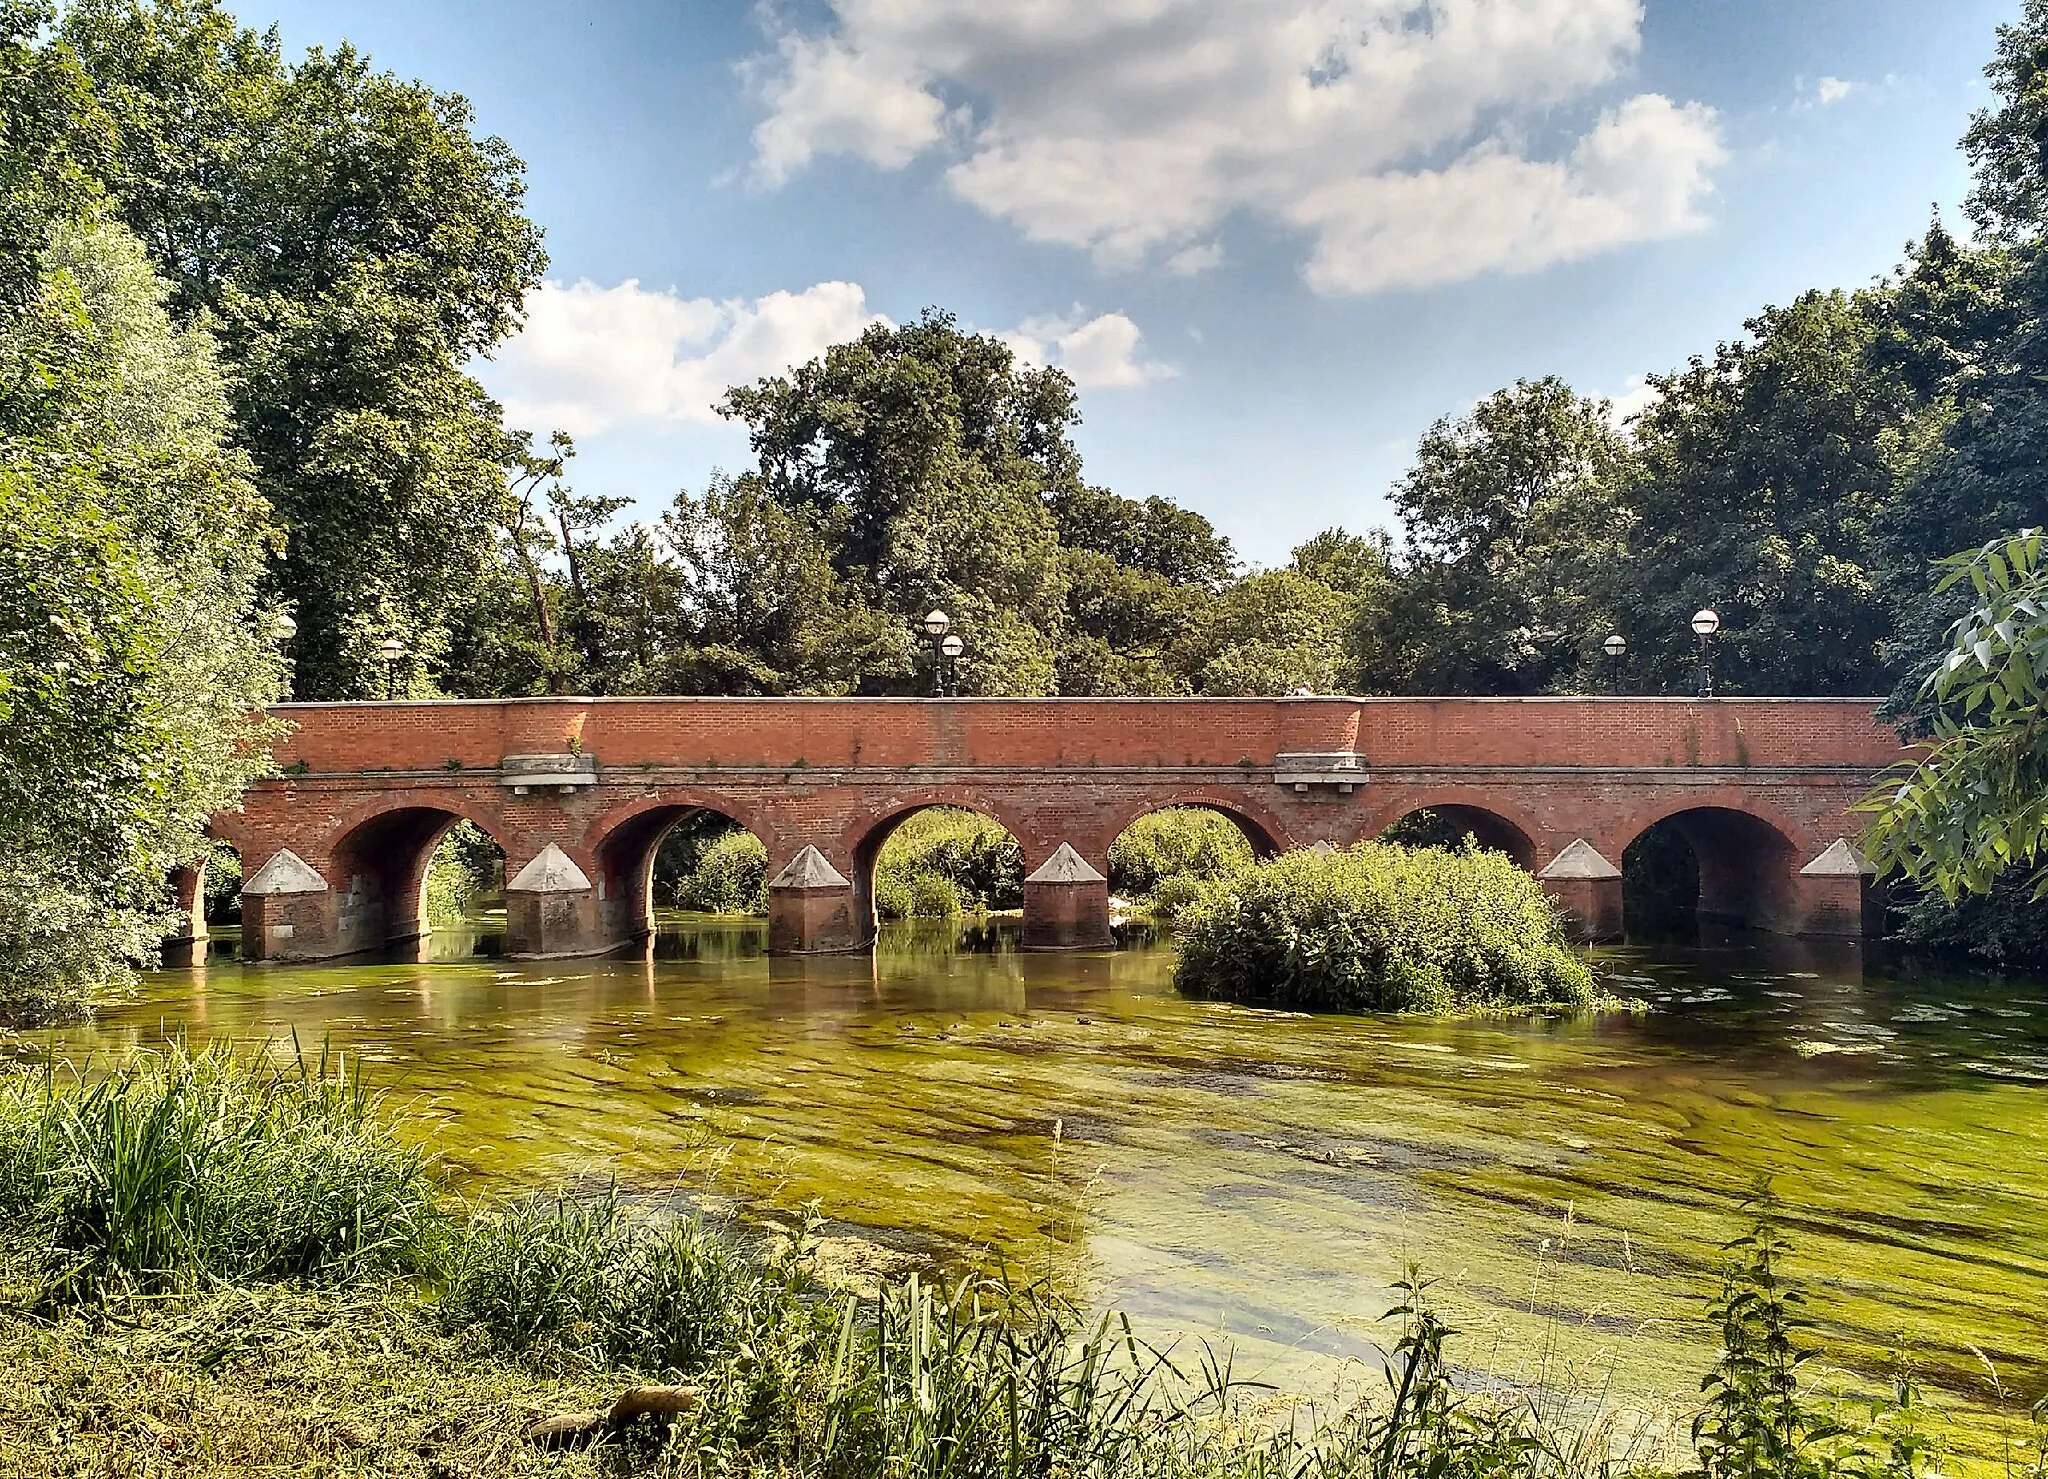 Photo showing: An arched, brick bridge over the River Mole in Leatherhead, Surrey